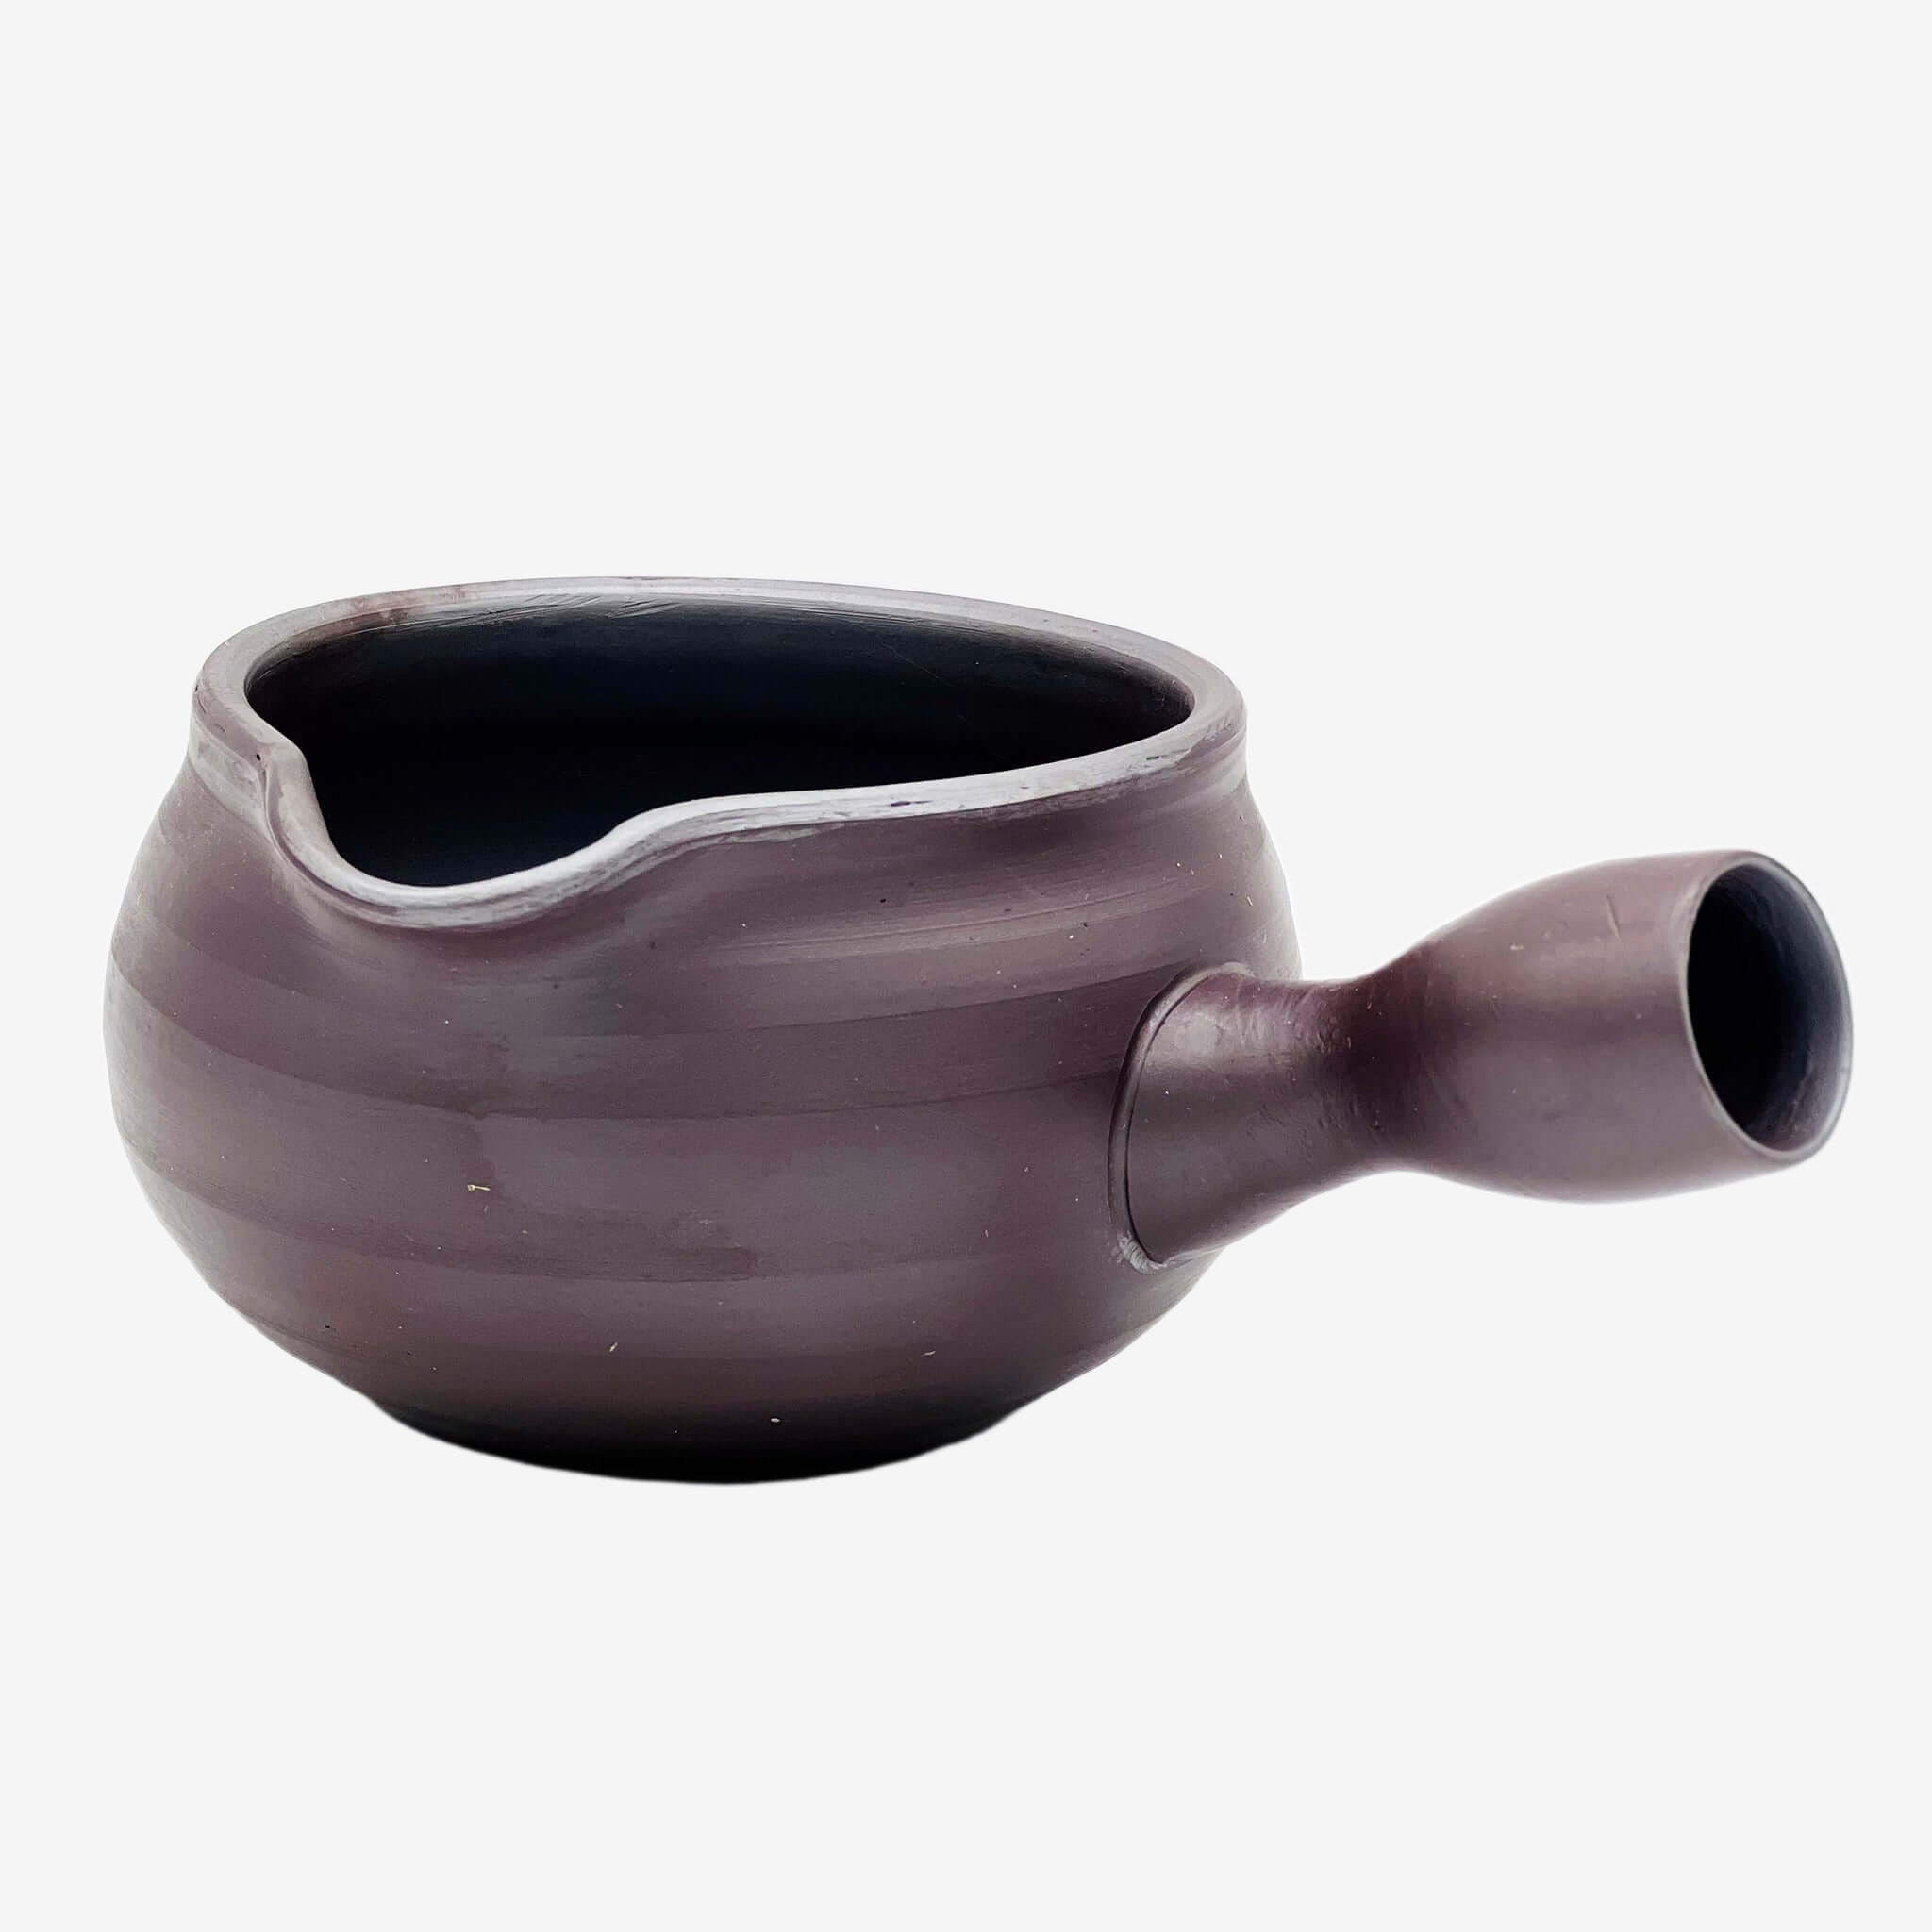 MUJI Australia - The porcelain aroma pot is great for